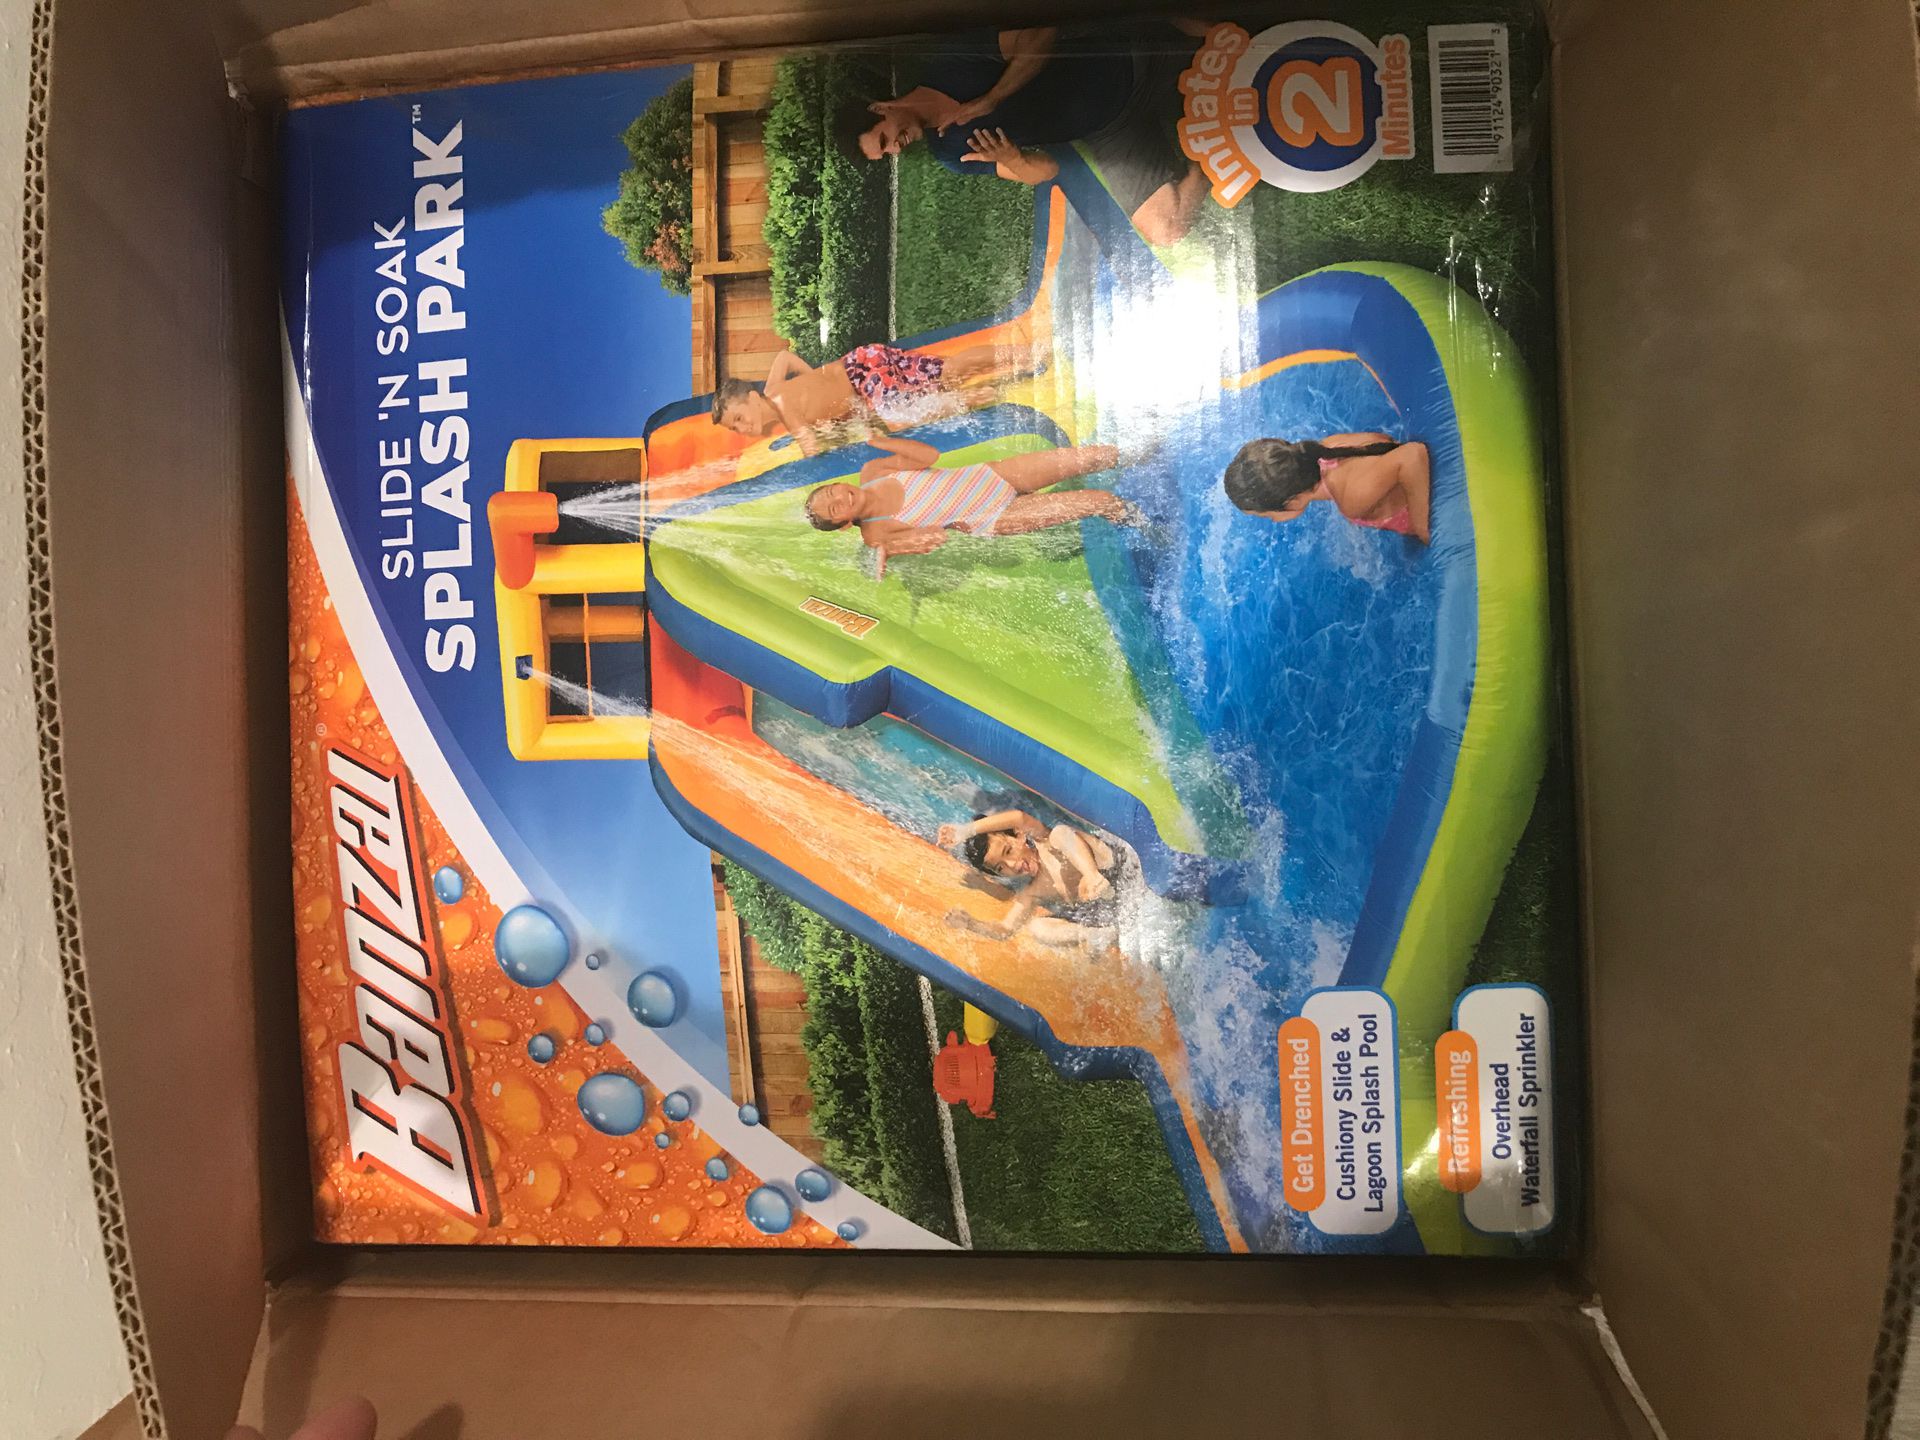 Banzai water splash waterpark $699 Brand new never opened rare sold out everywhere